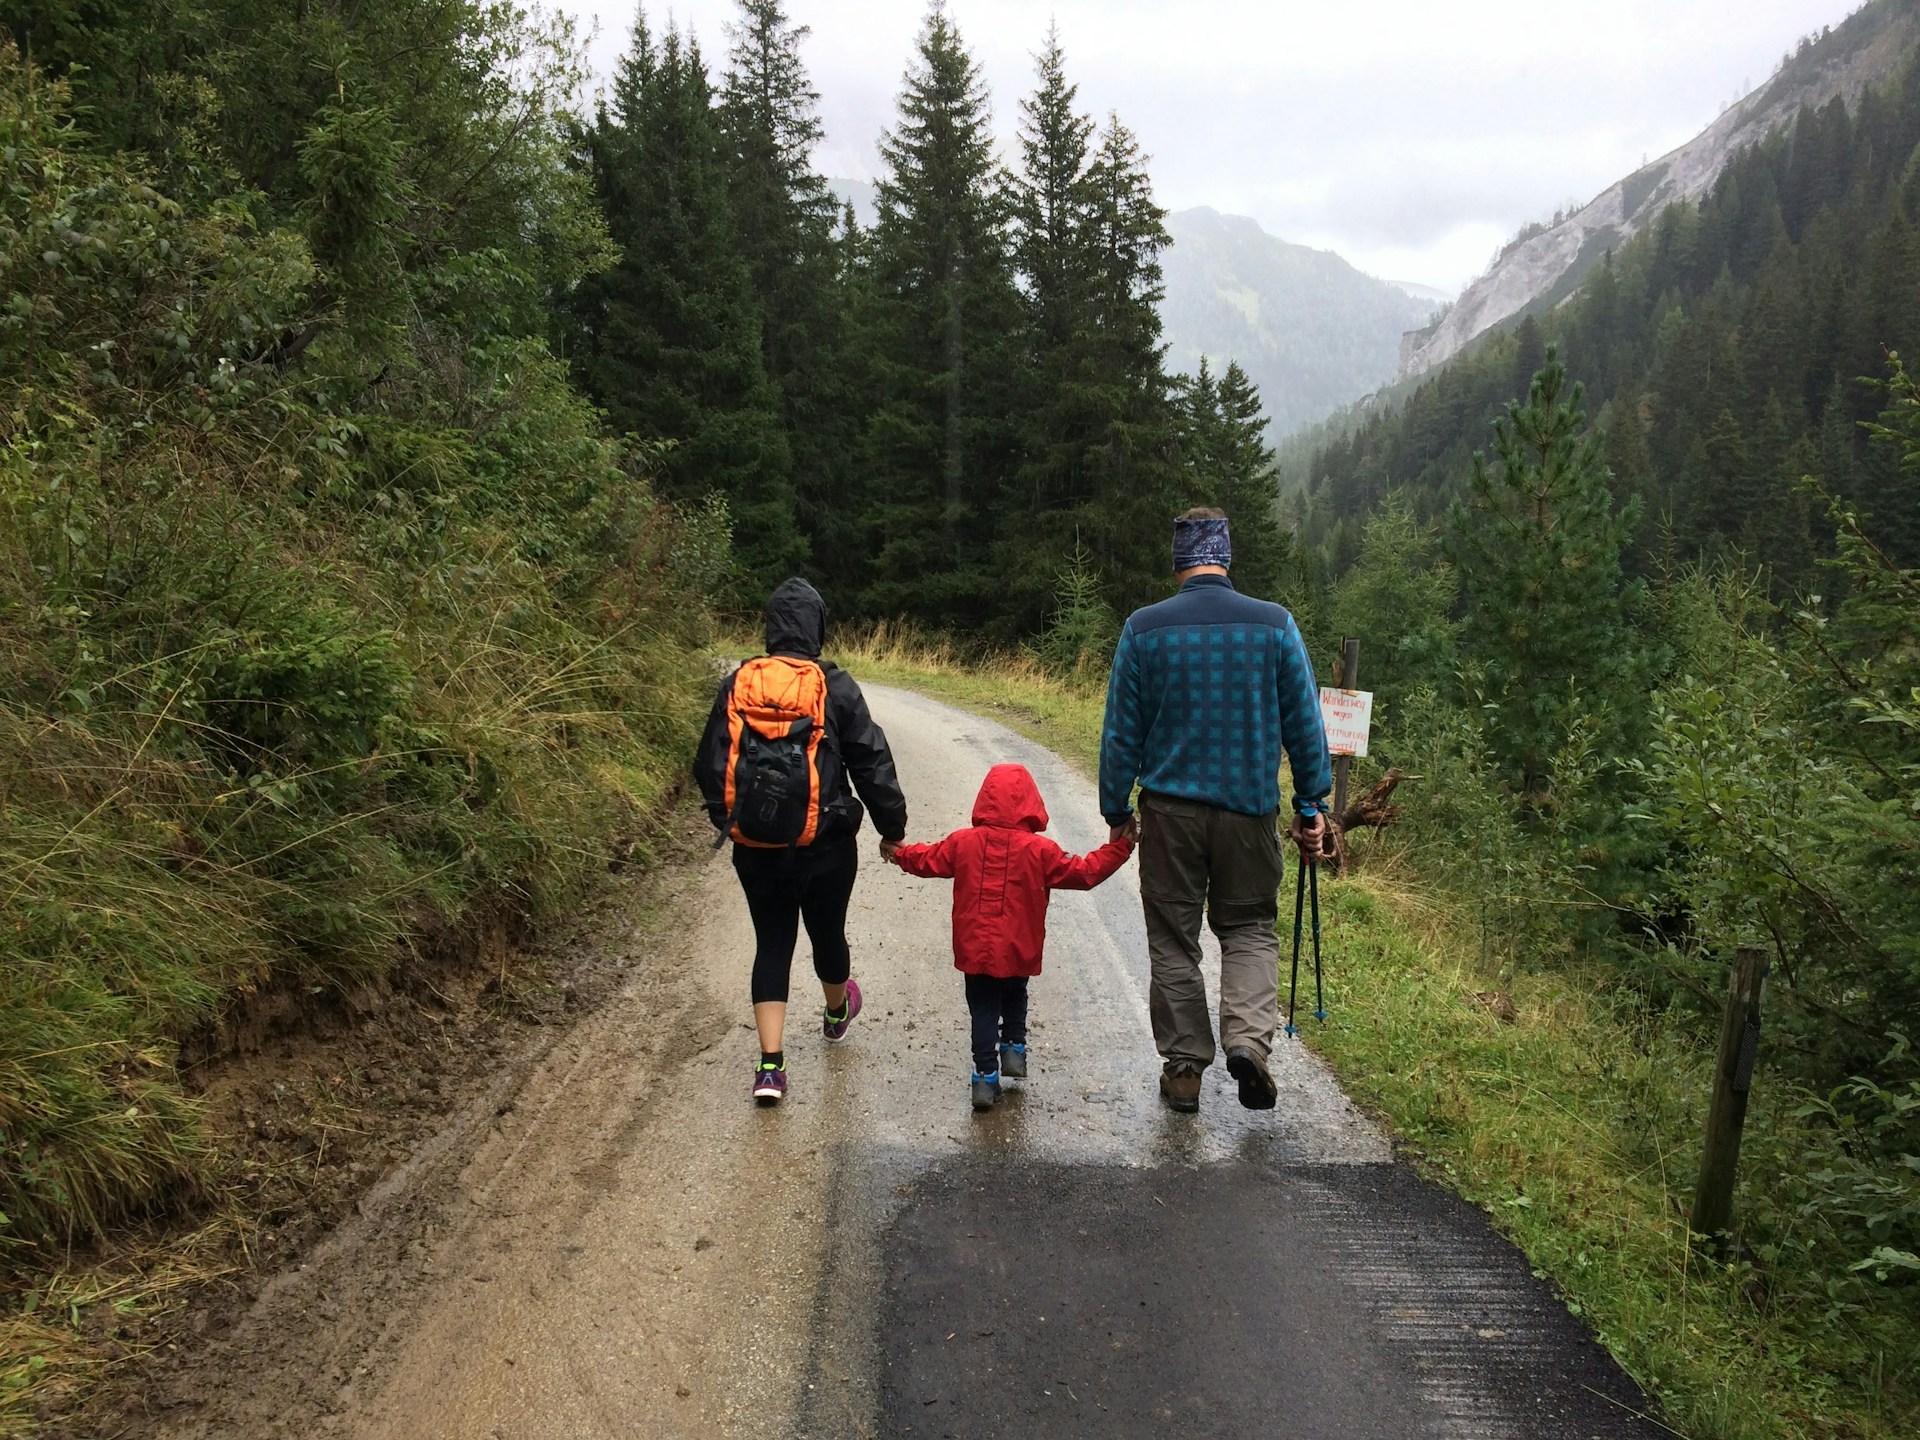 Family on a hike walking down the road